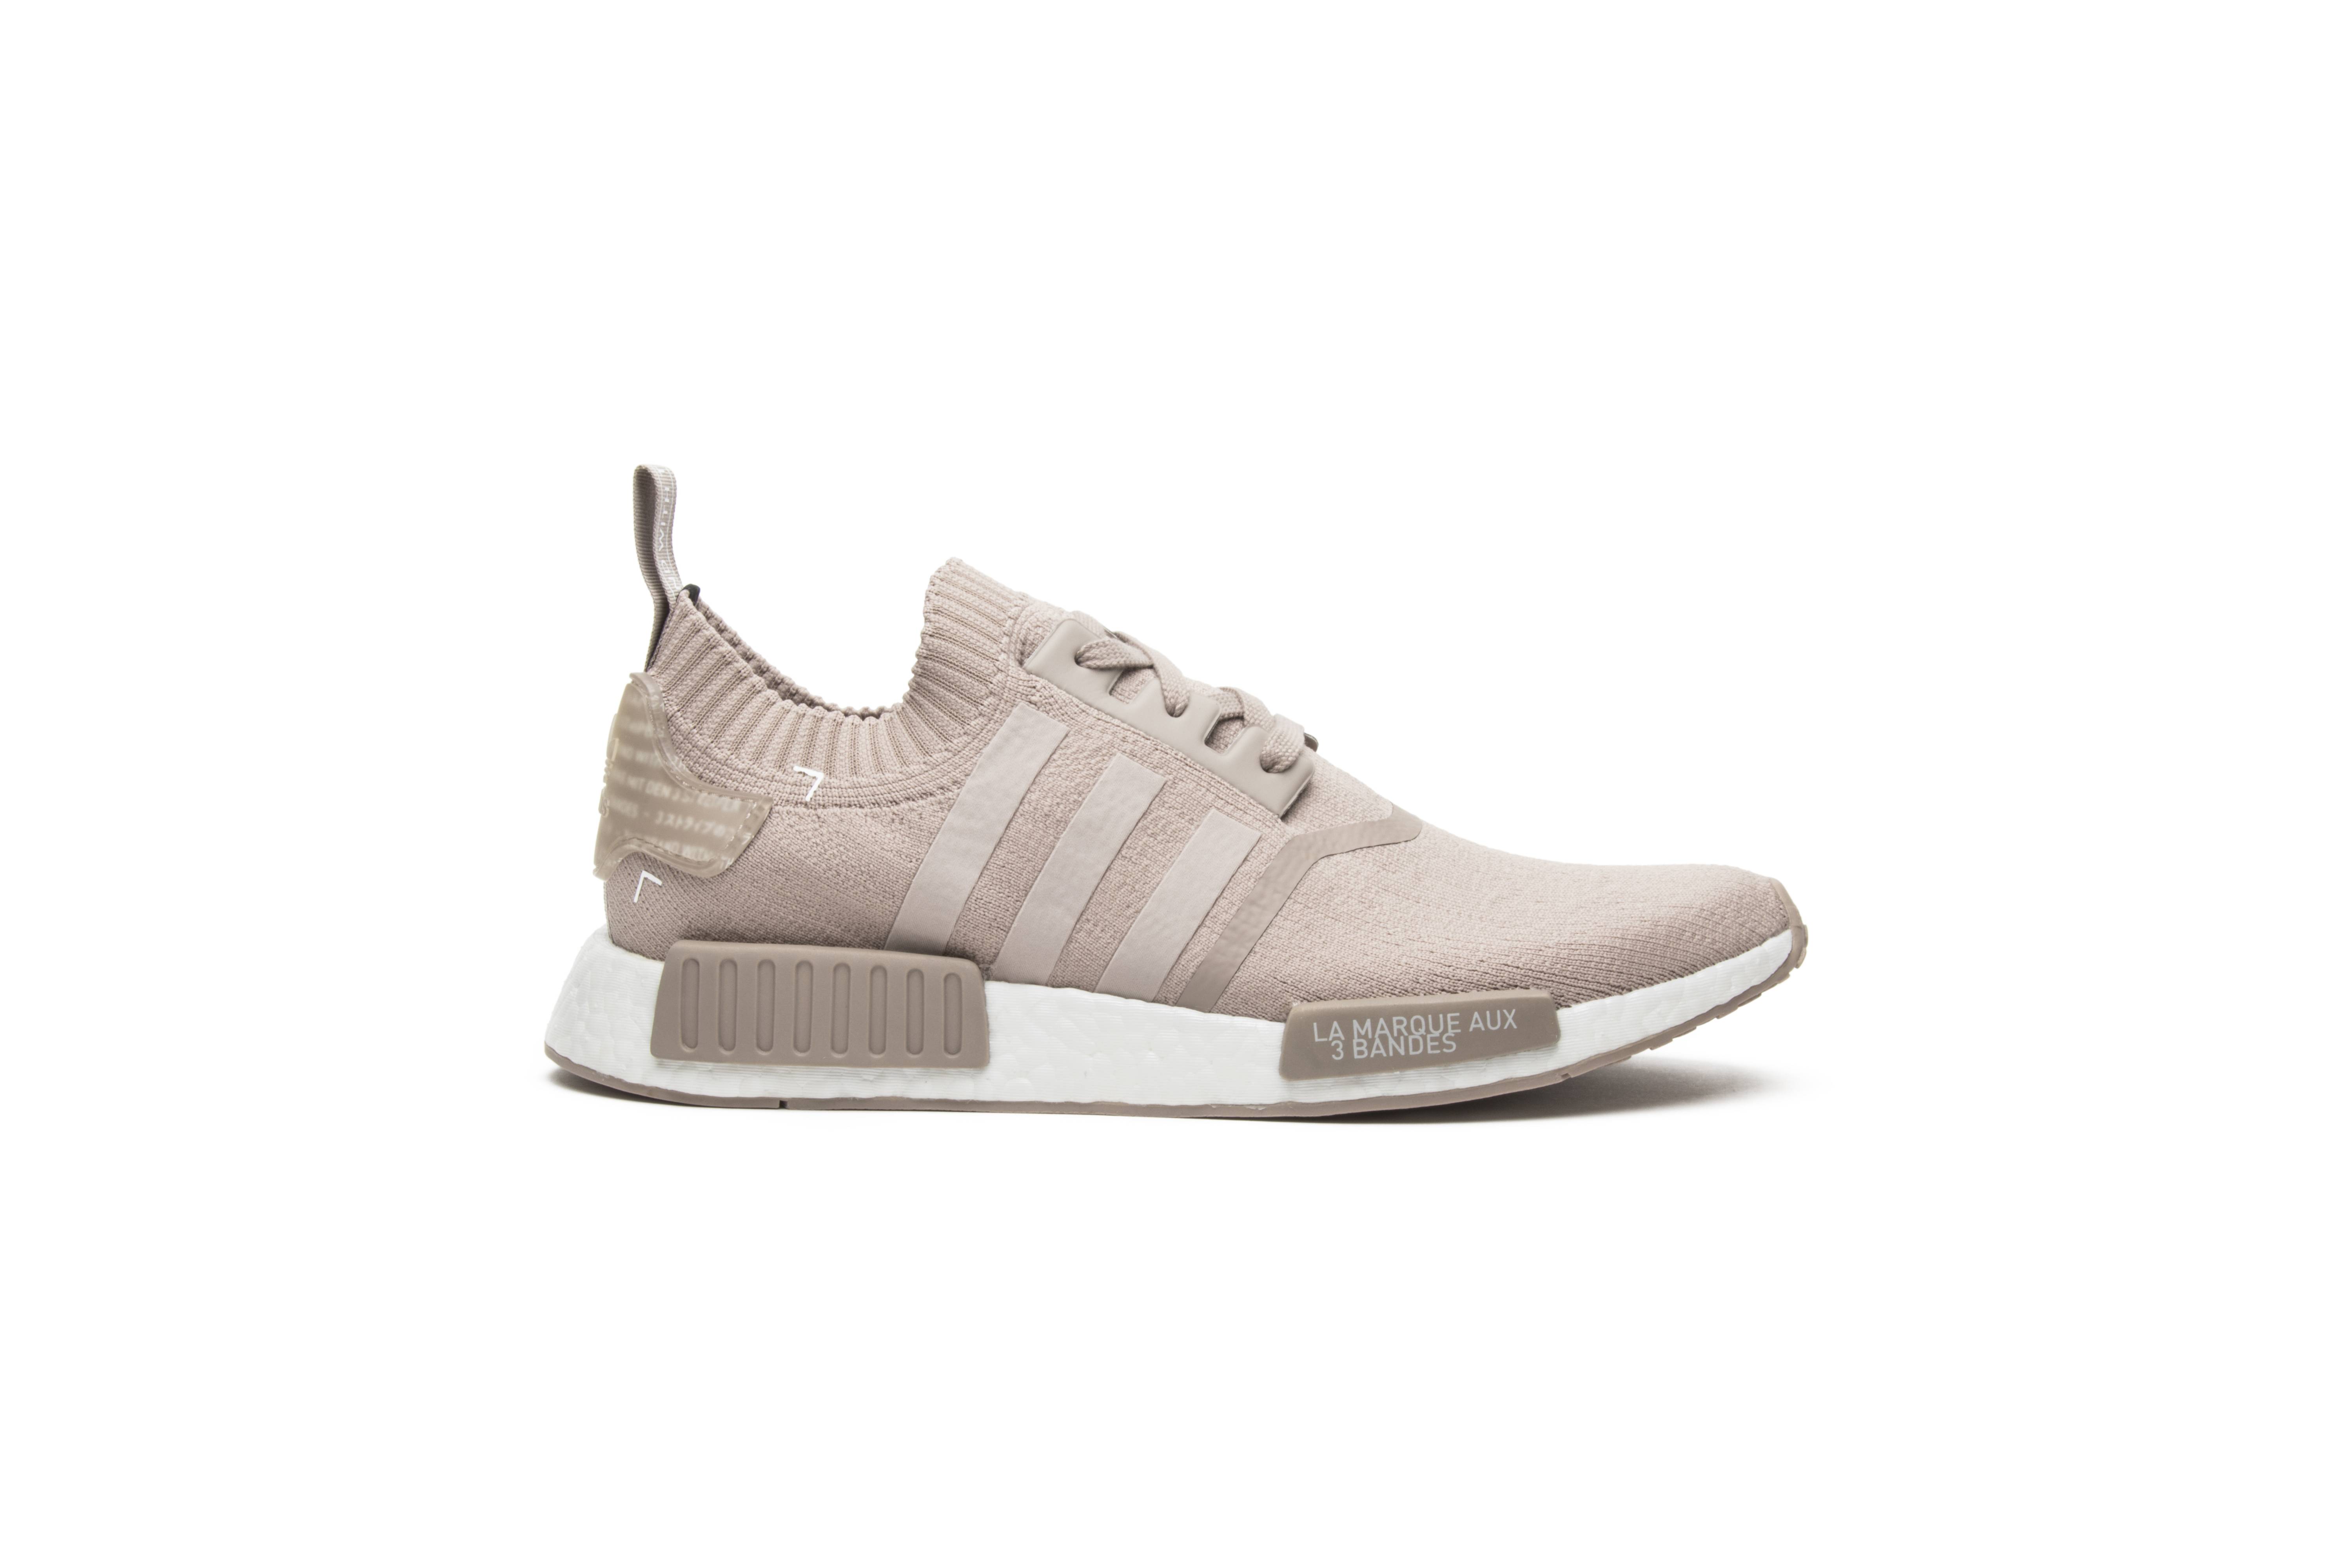 adidas NMD R1 French Beige - S81848 